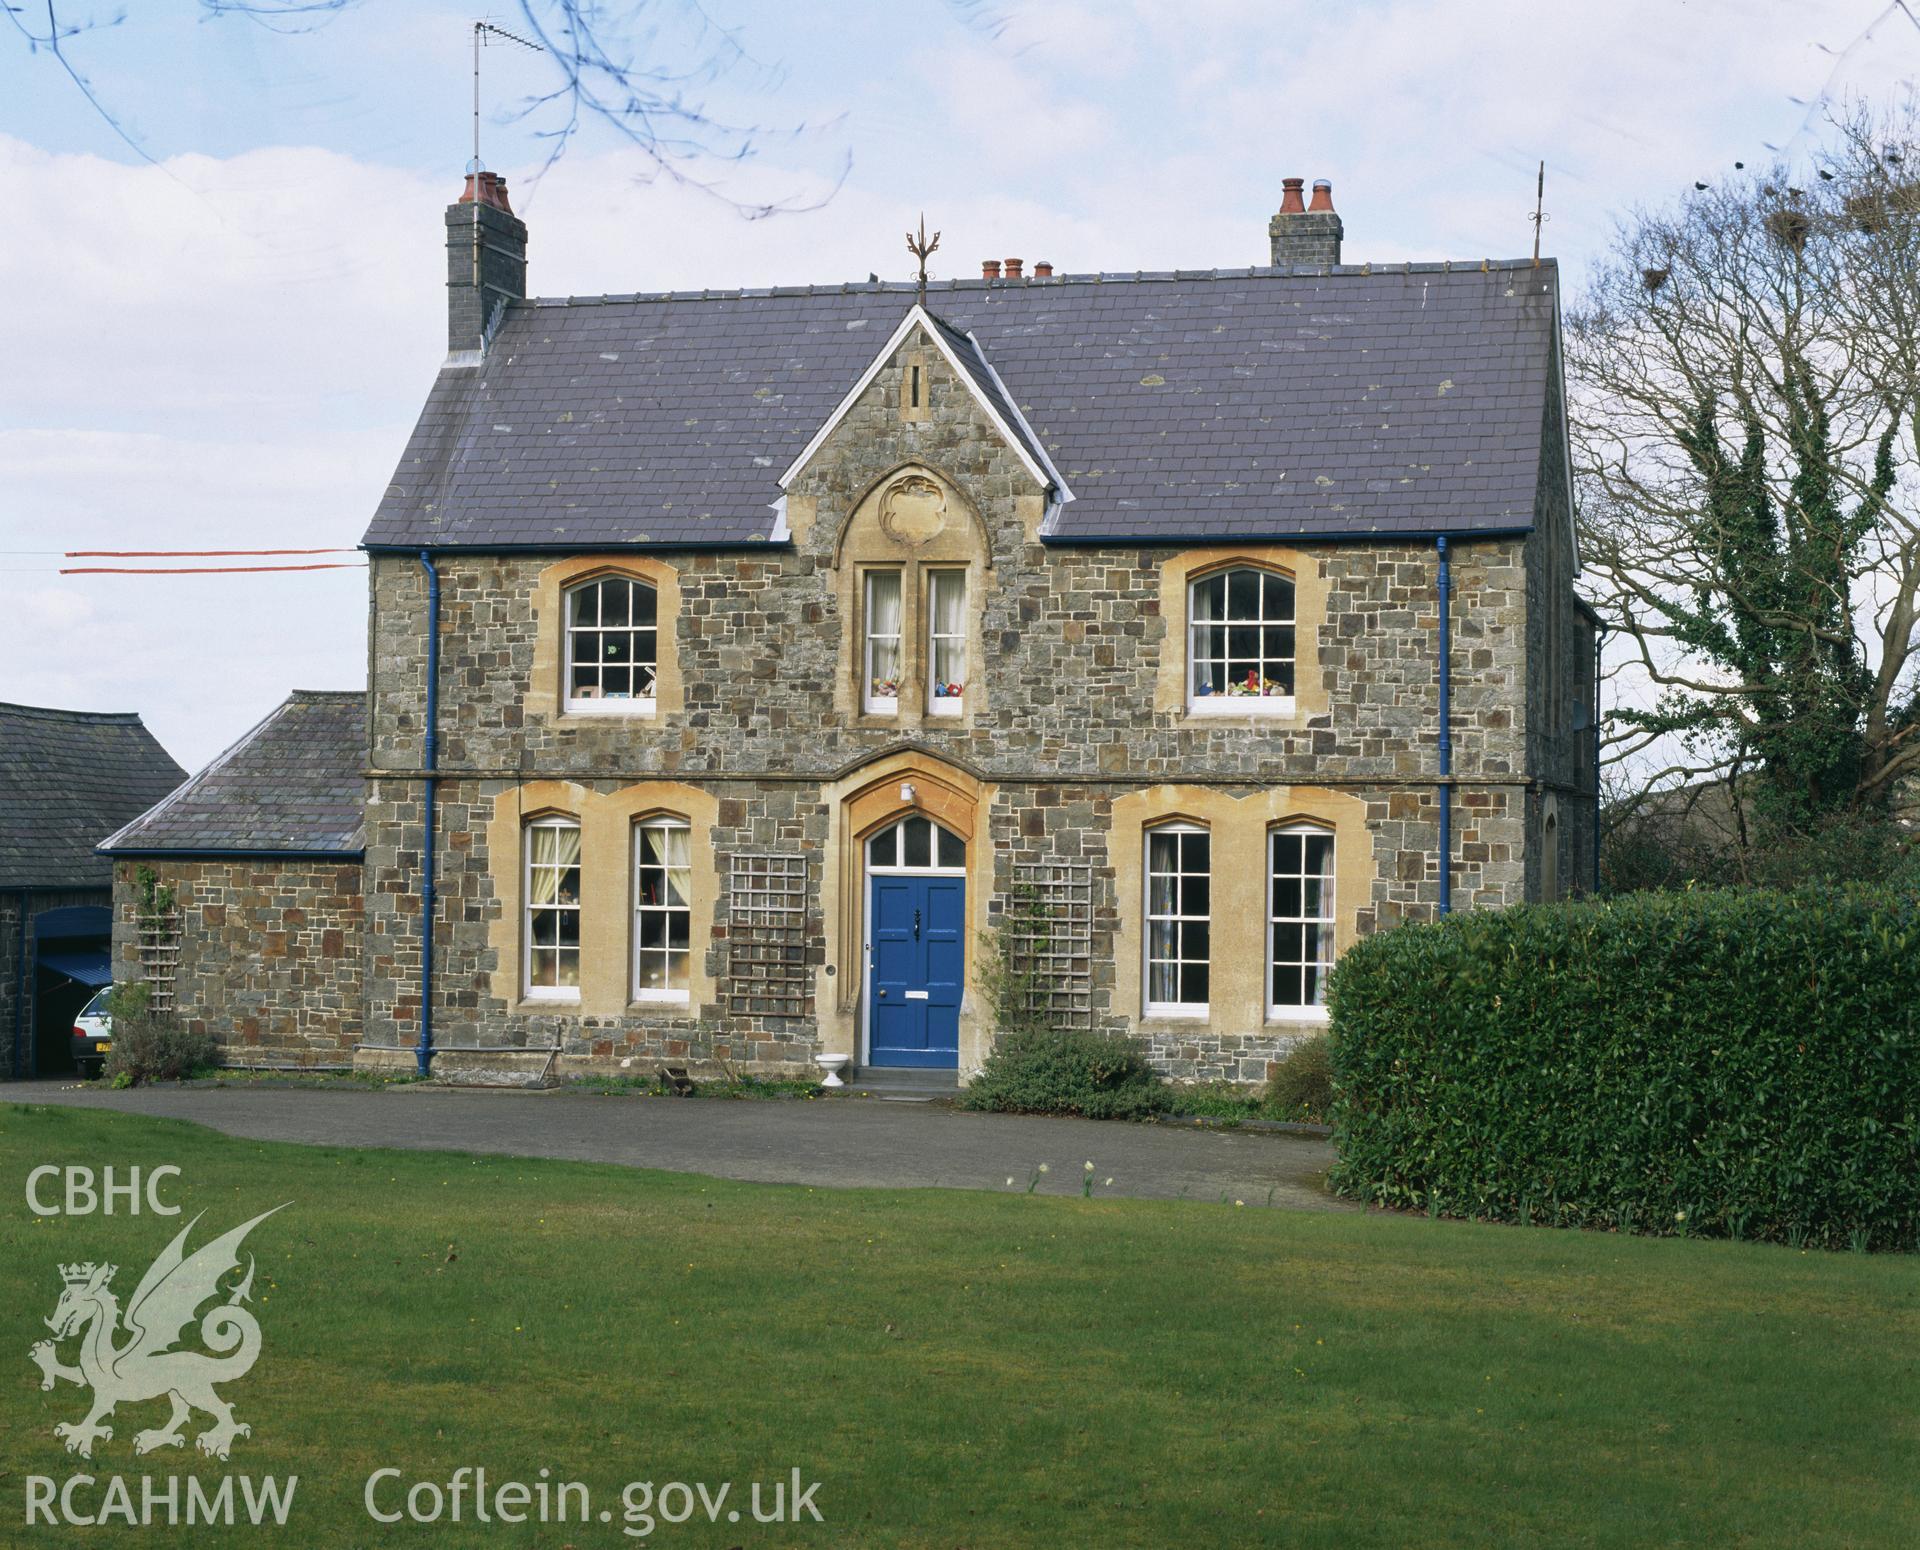 Colour transparency showing the Vicarage at Aberaeron, produced by Iain Wright, June 2004